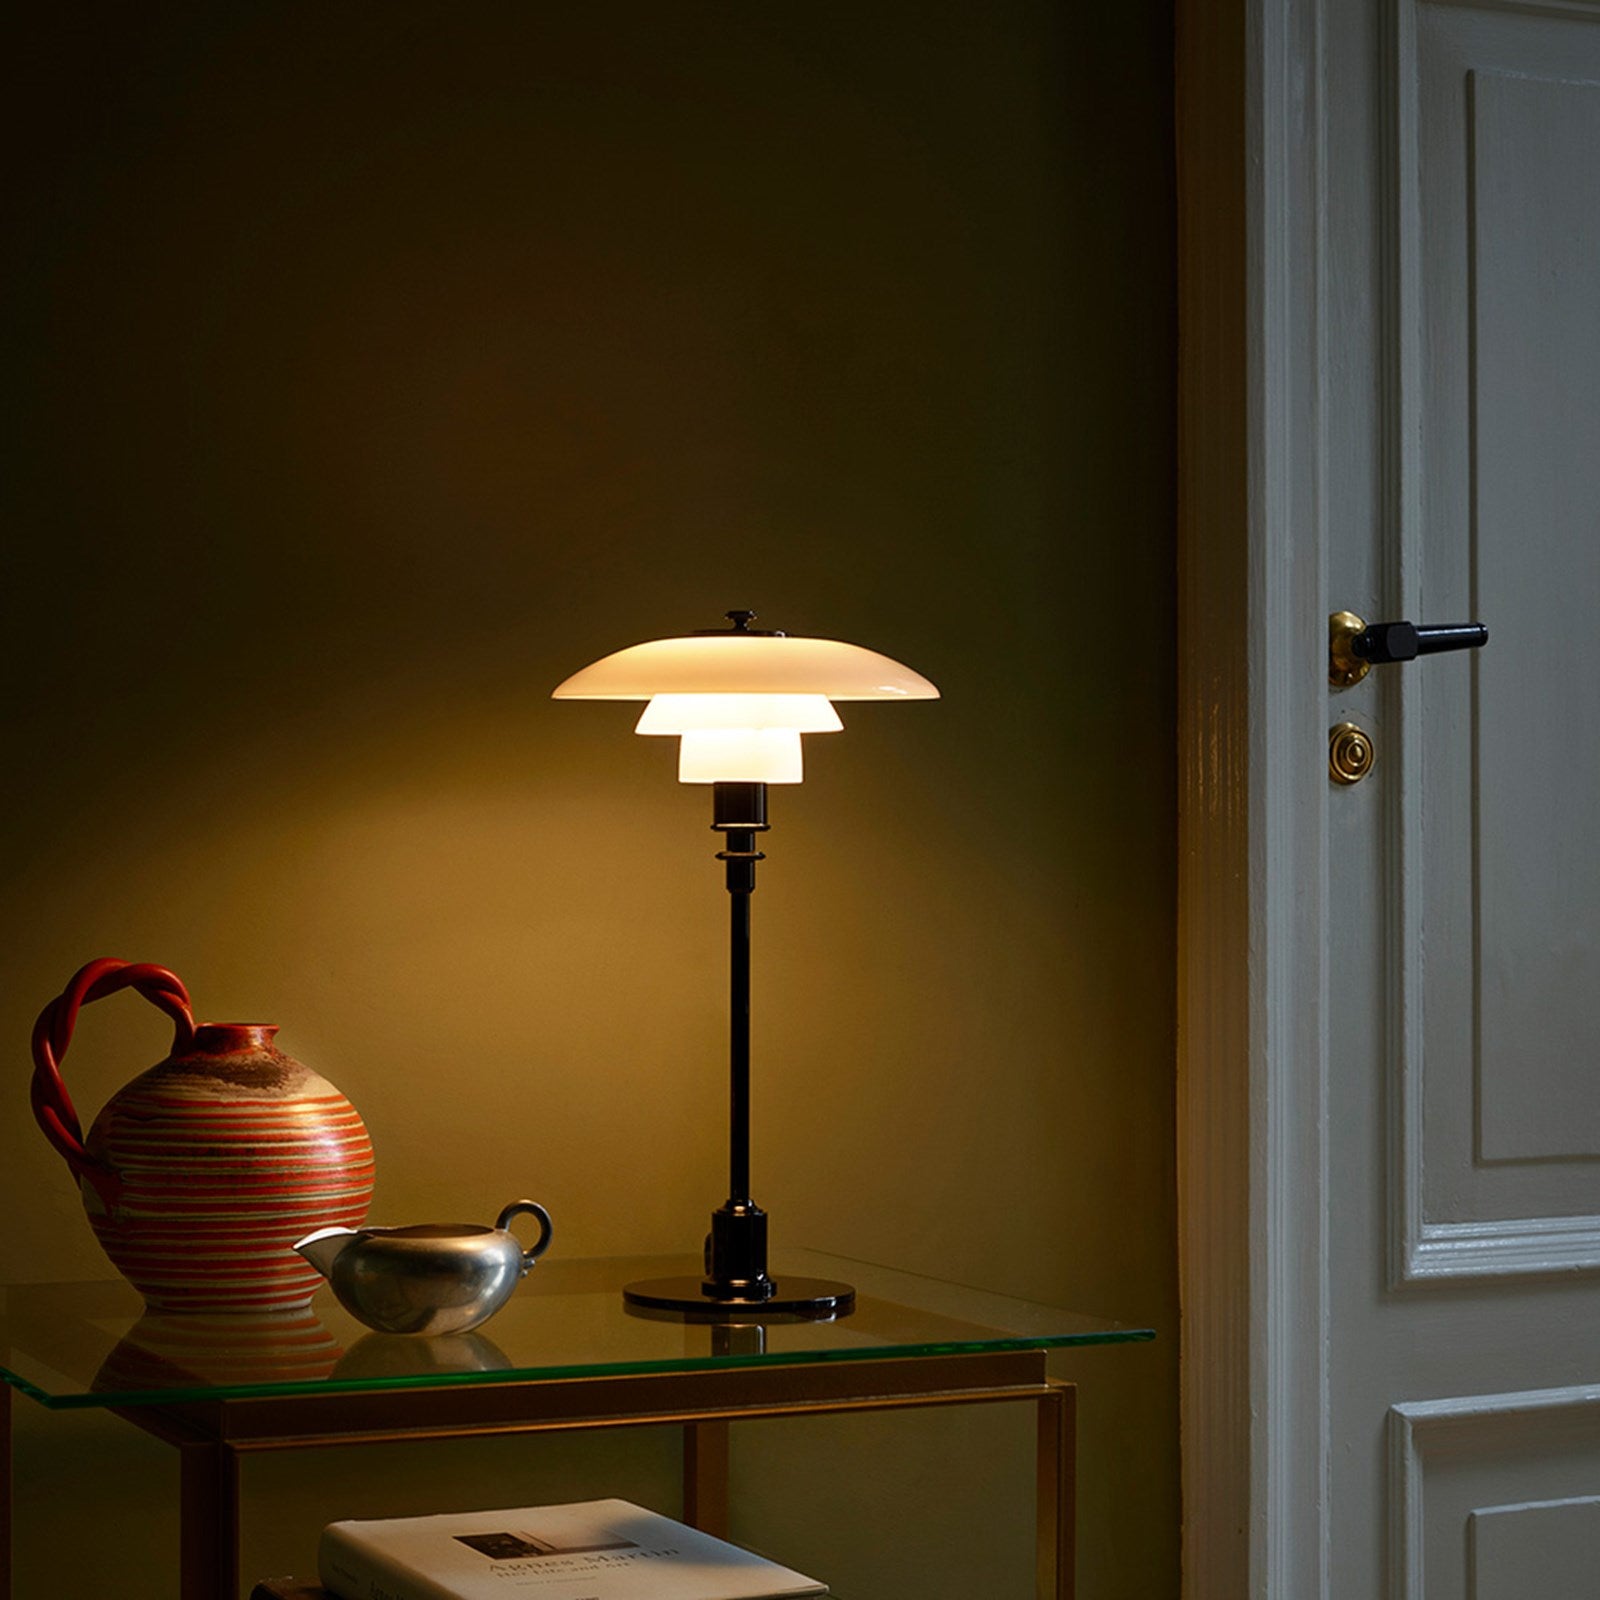 The PH 2/1 Table Light by Paul Henningsen for Louis Poulsen features a triple-layer hand blown glass shade that rests on a beautiful, lightly brushed brass frame, which references the original PH Table Lamp from 1927. Its design evokes timeless elegance with its use of classic materials. Complimenting environments both simple and eclectic, the PH 2/1 boasts a small profile making the lamp endlessly adaptable anywhere within the home, like on a windowsill or small table. 